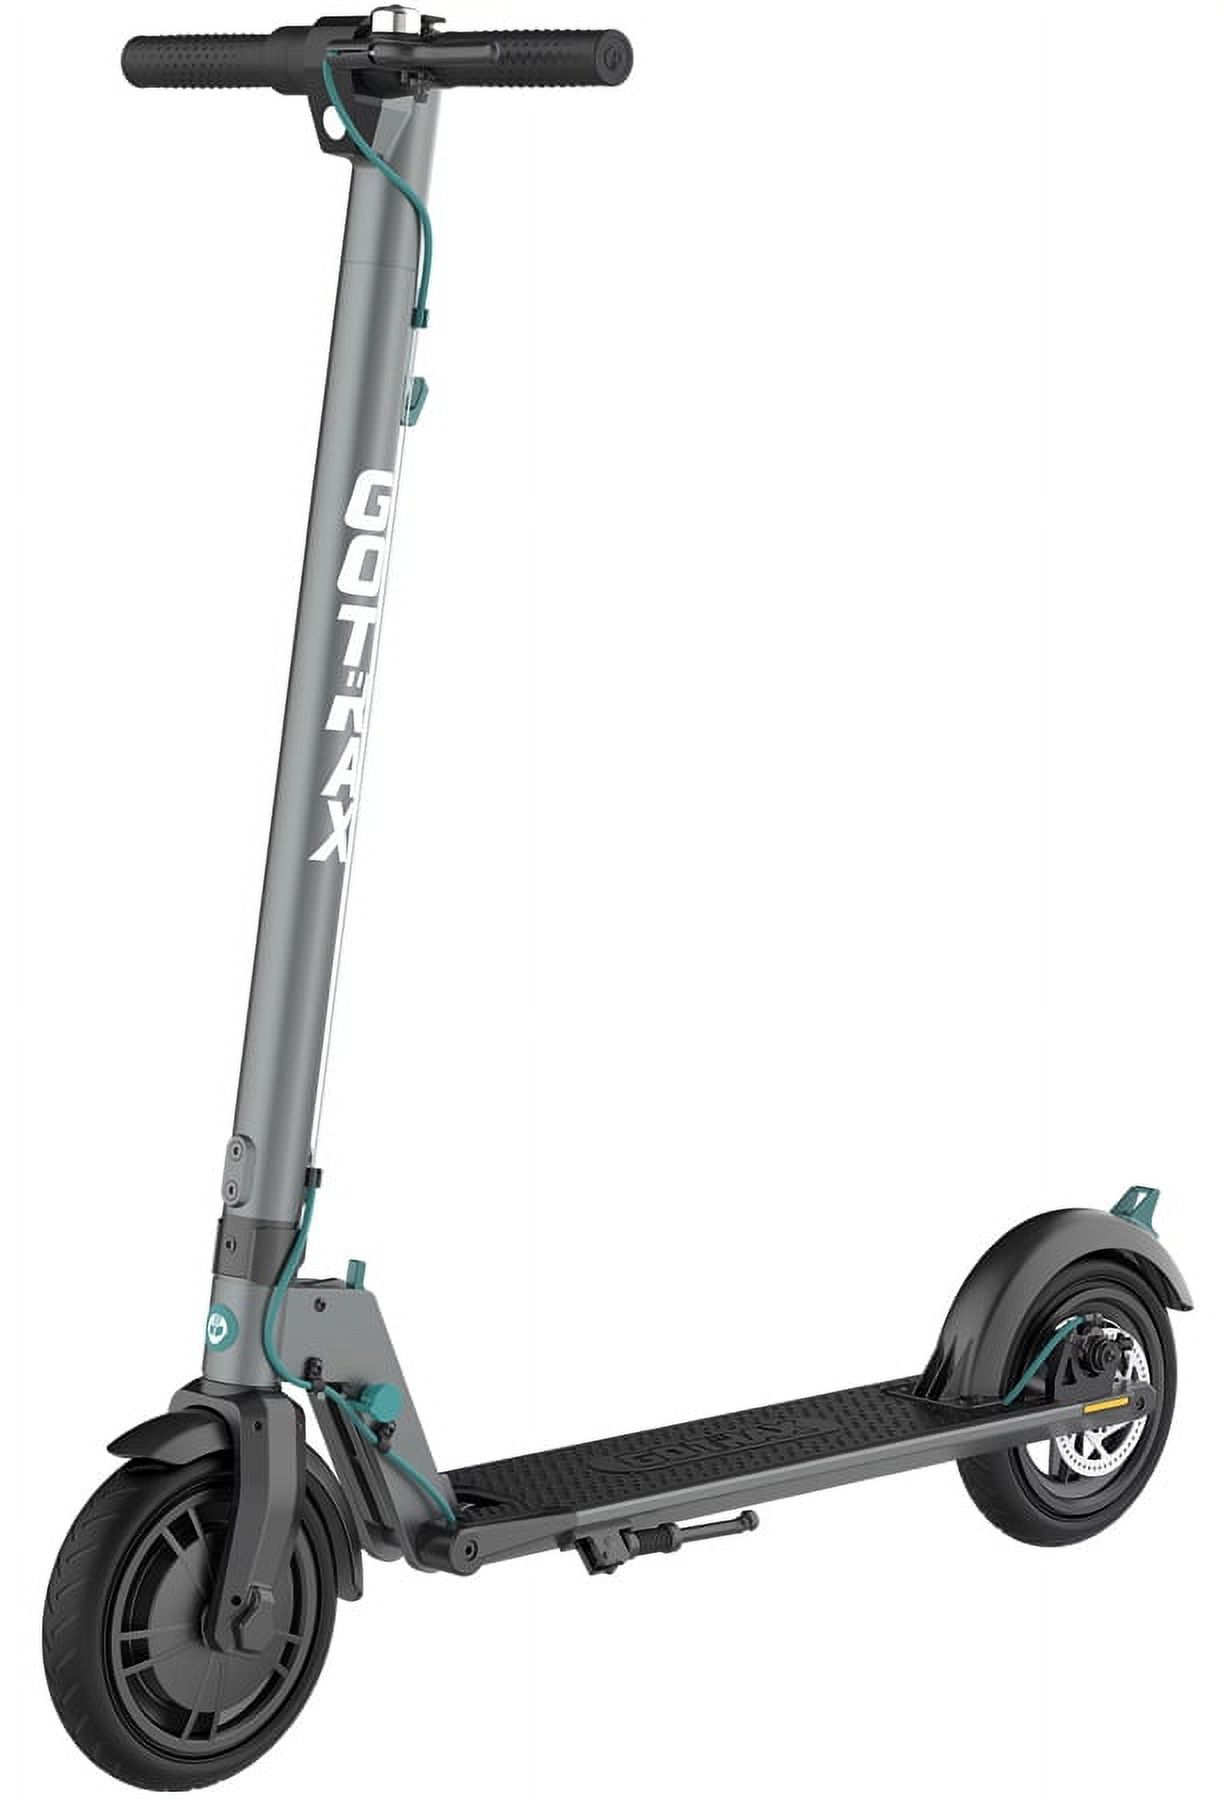 GOTRAX Rival Adult Electric Scooter, 8.5" Pneumatic Tire, Max 12 mile Range and 15.5Mph Speed, 250W Foldable Escooter for Adult, Charcoal Gray - image 1 of 10